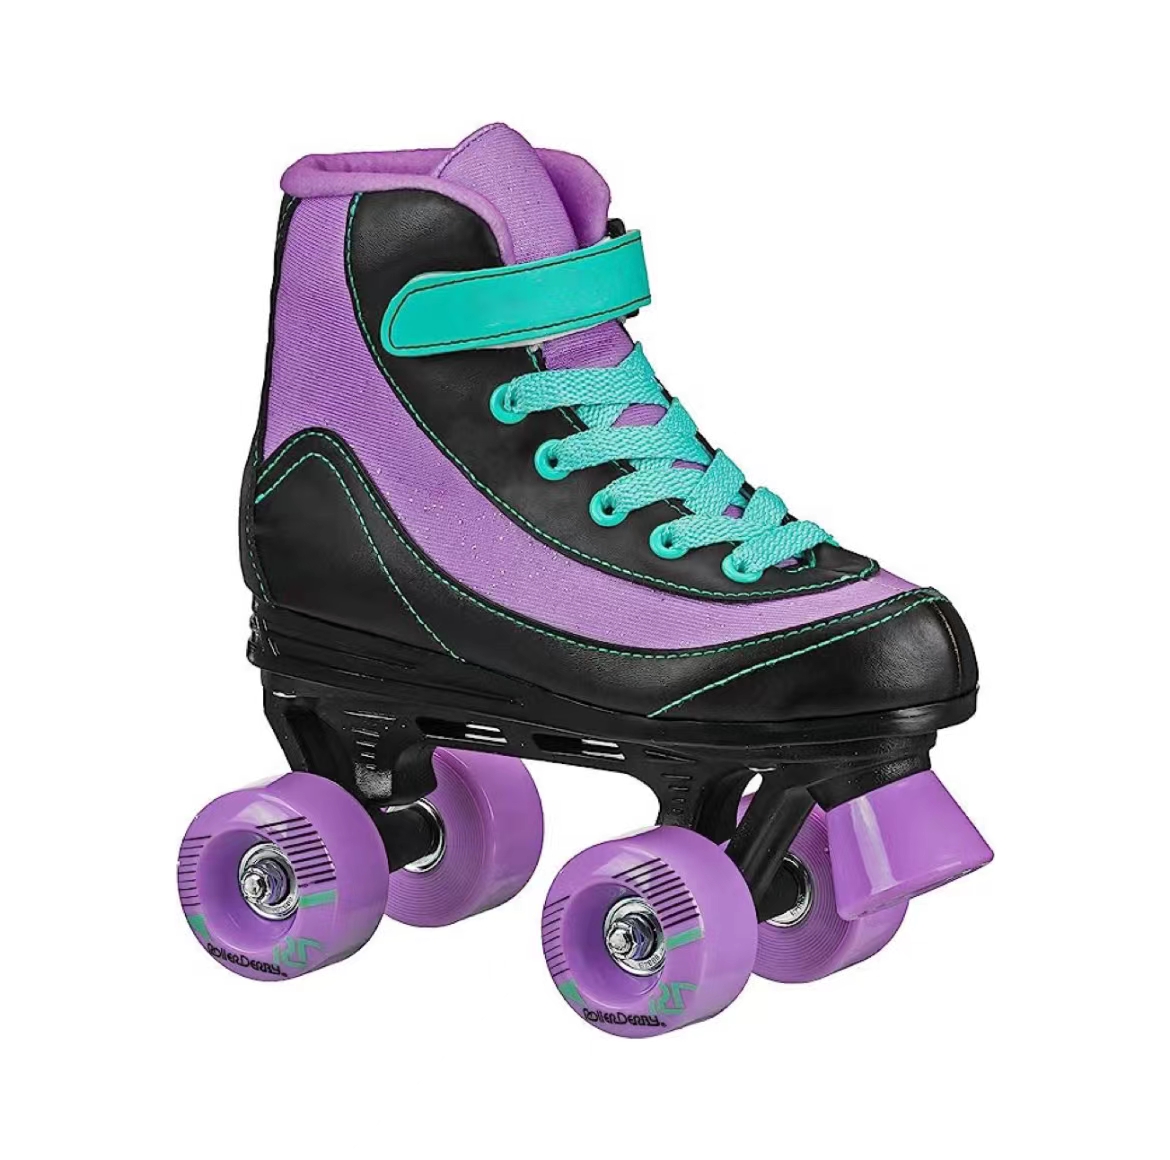 Four-wheeled Skates for Young Girls